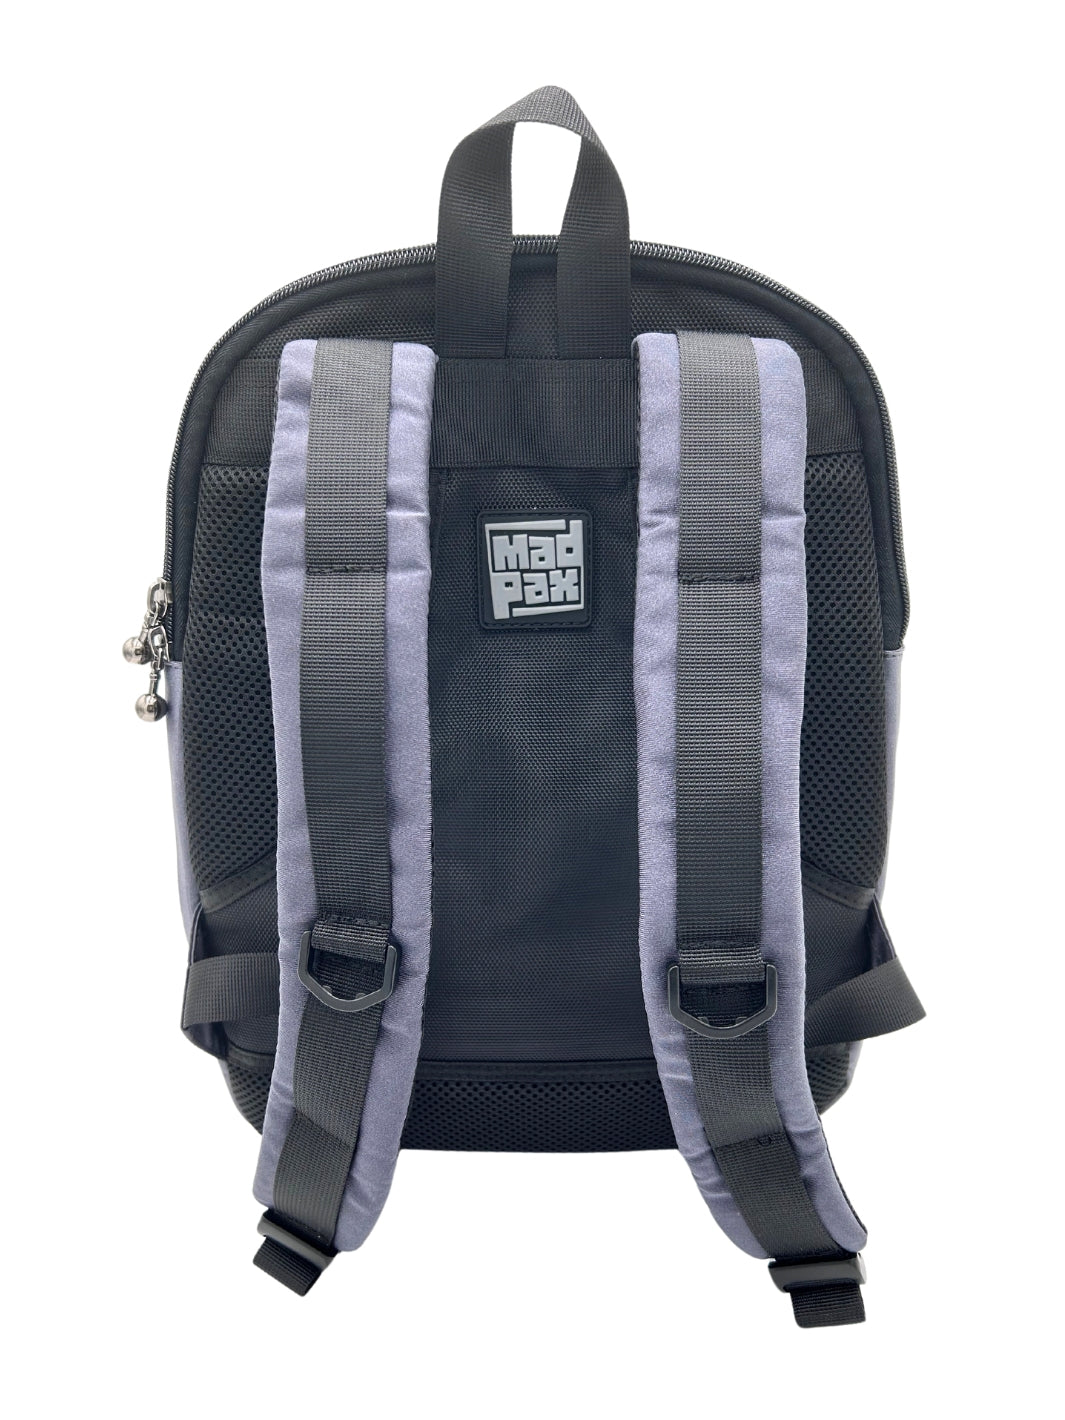 Daypack in Gray | Moonshot Daypack by Madpax Back View